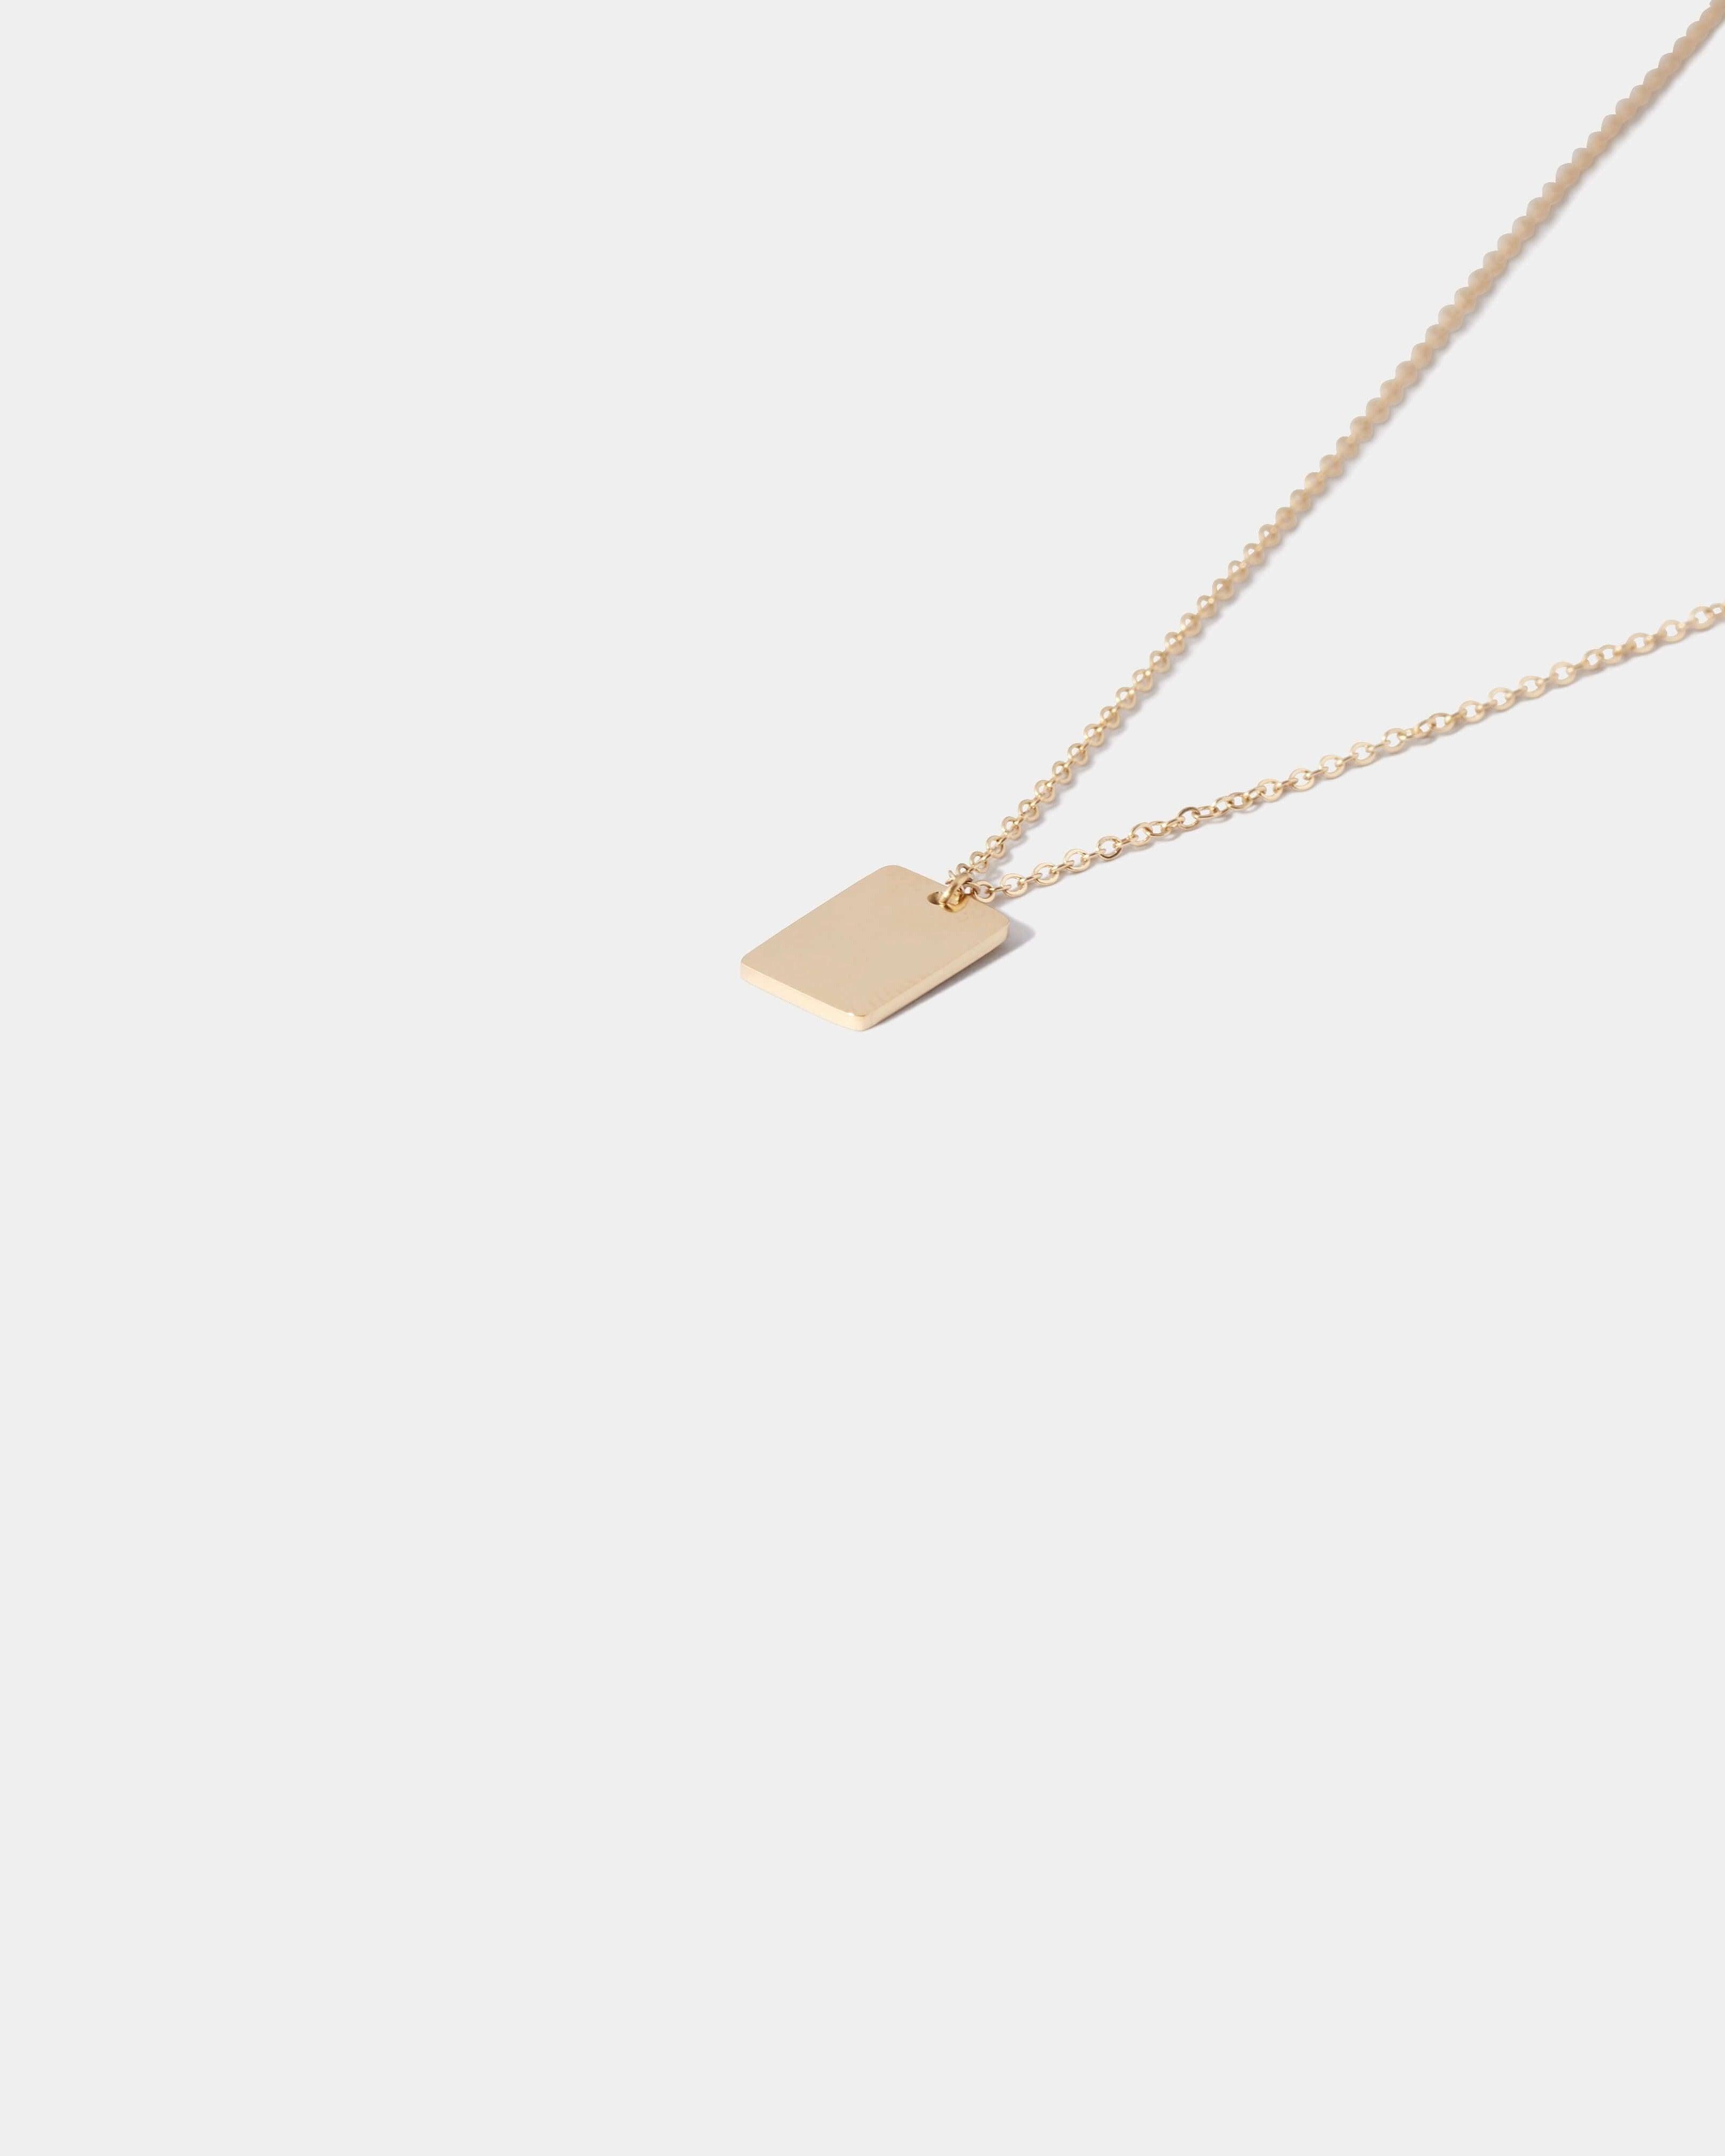 BOARD NECKLACE - LIMELY